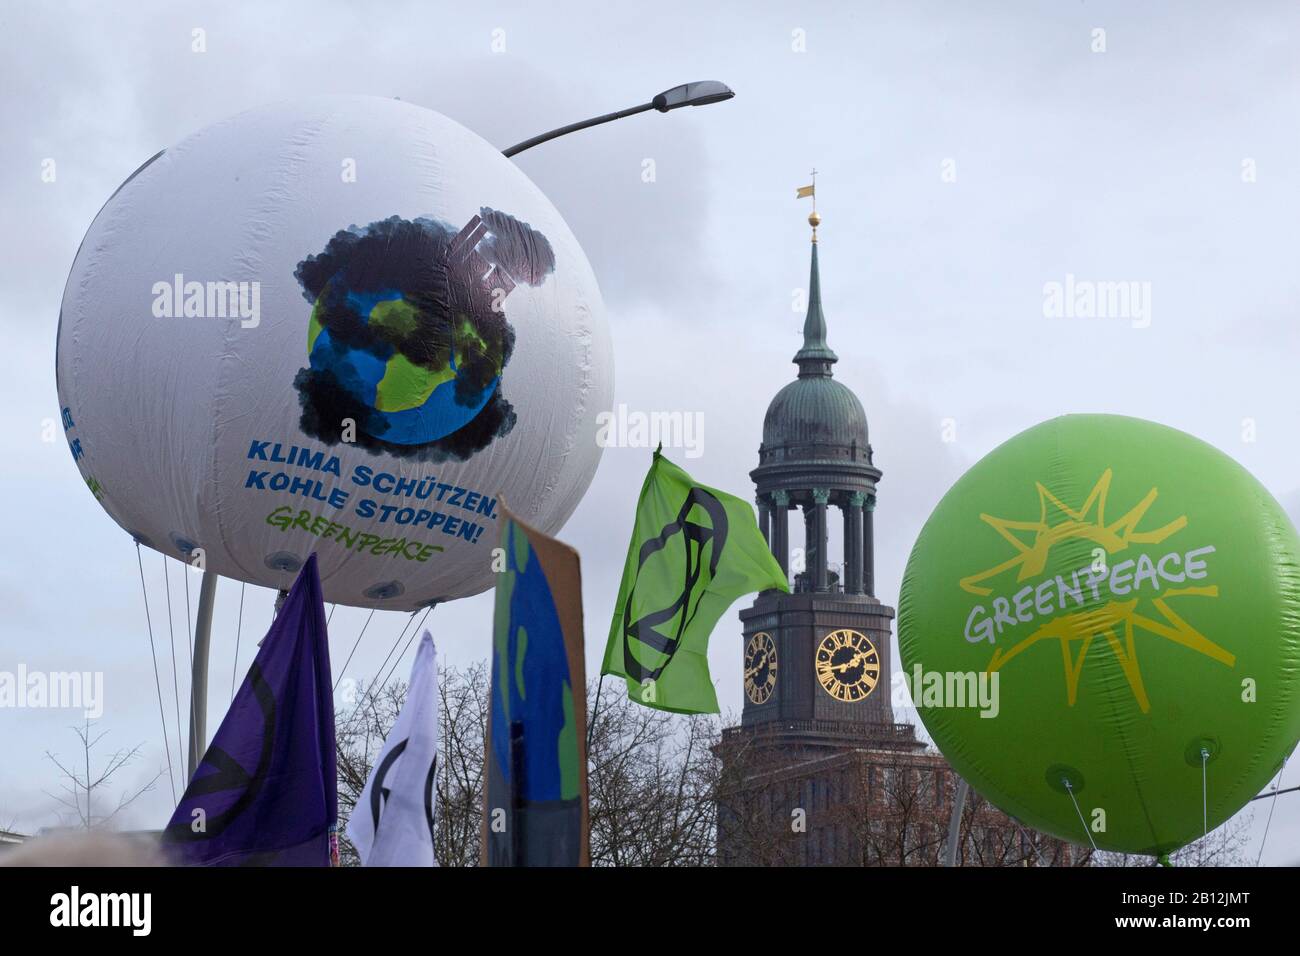 Greenpeace balloons at the Fridays For Future demonstration in Hamburg, Germany, on February, 21, 2020 Stock Photo